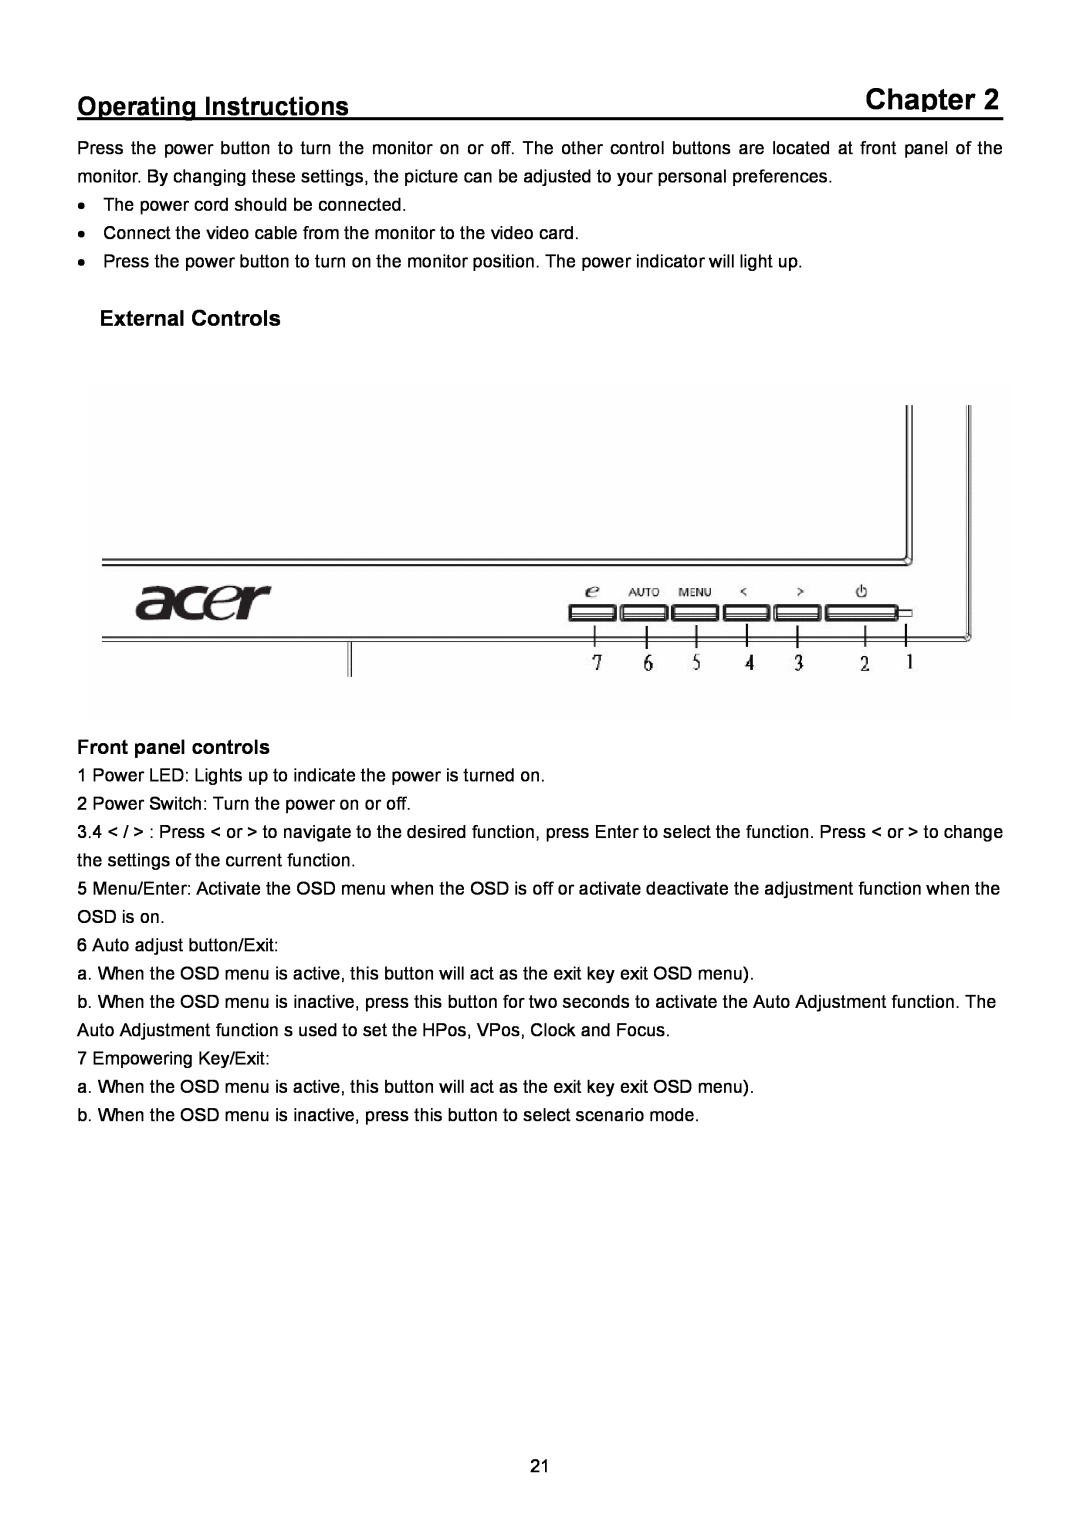 Acer B193R manual Operating Instructions, External Controls, Front panel controls, Chapter 